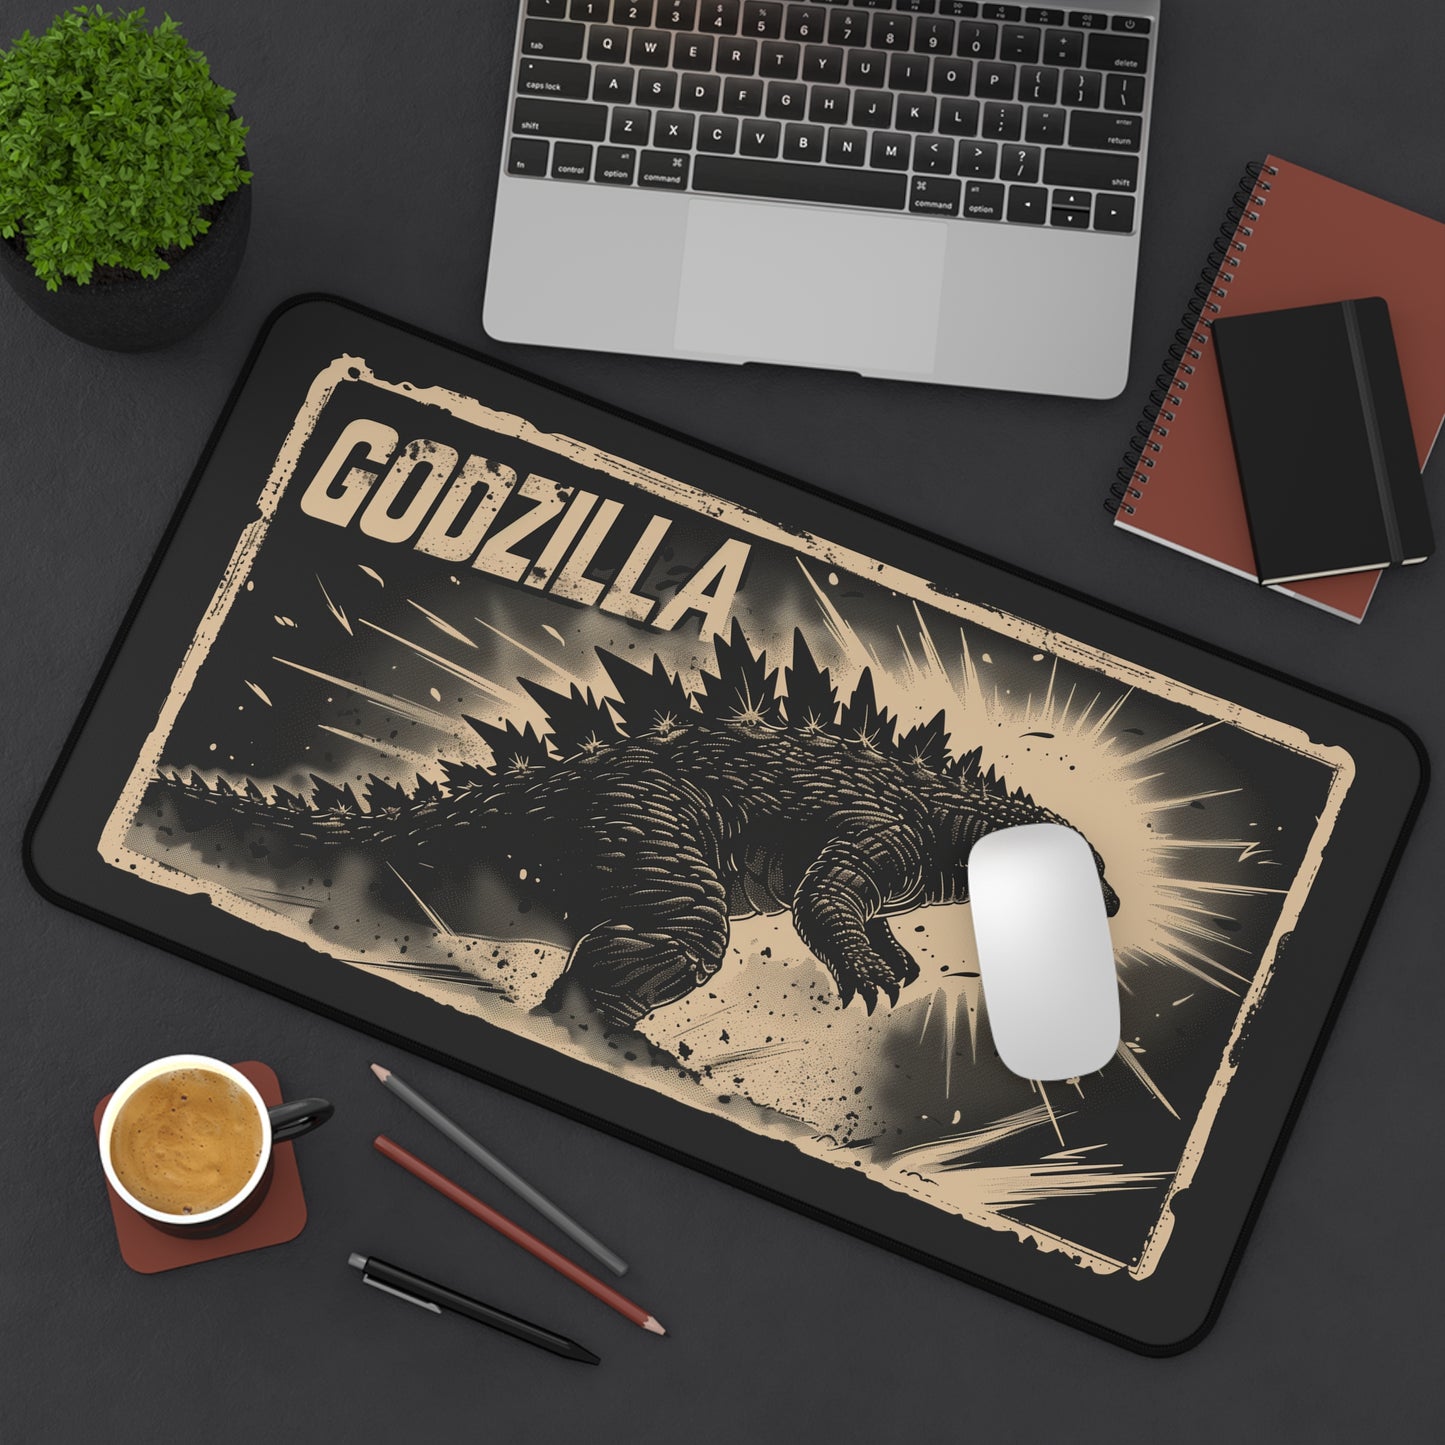 Godzilla Vintage High Definition Game Home Video Game PC PS Desk Mat Mousepad